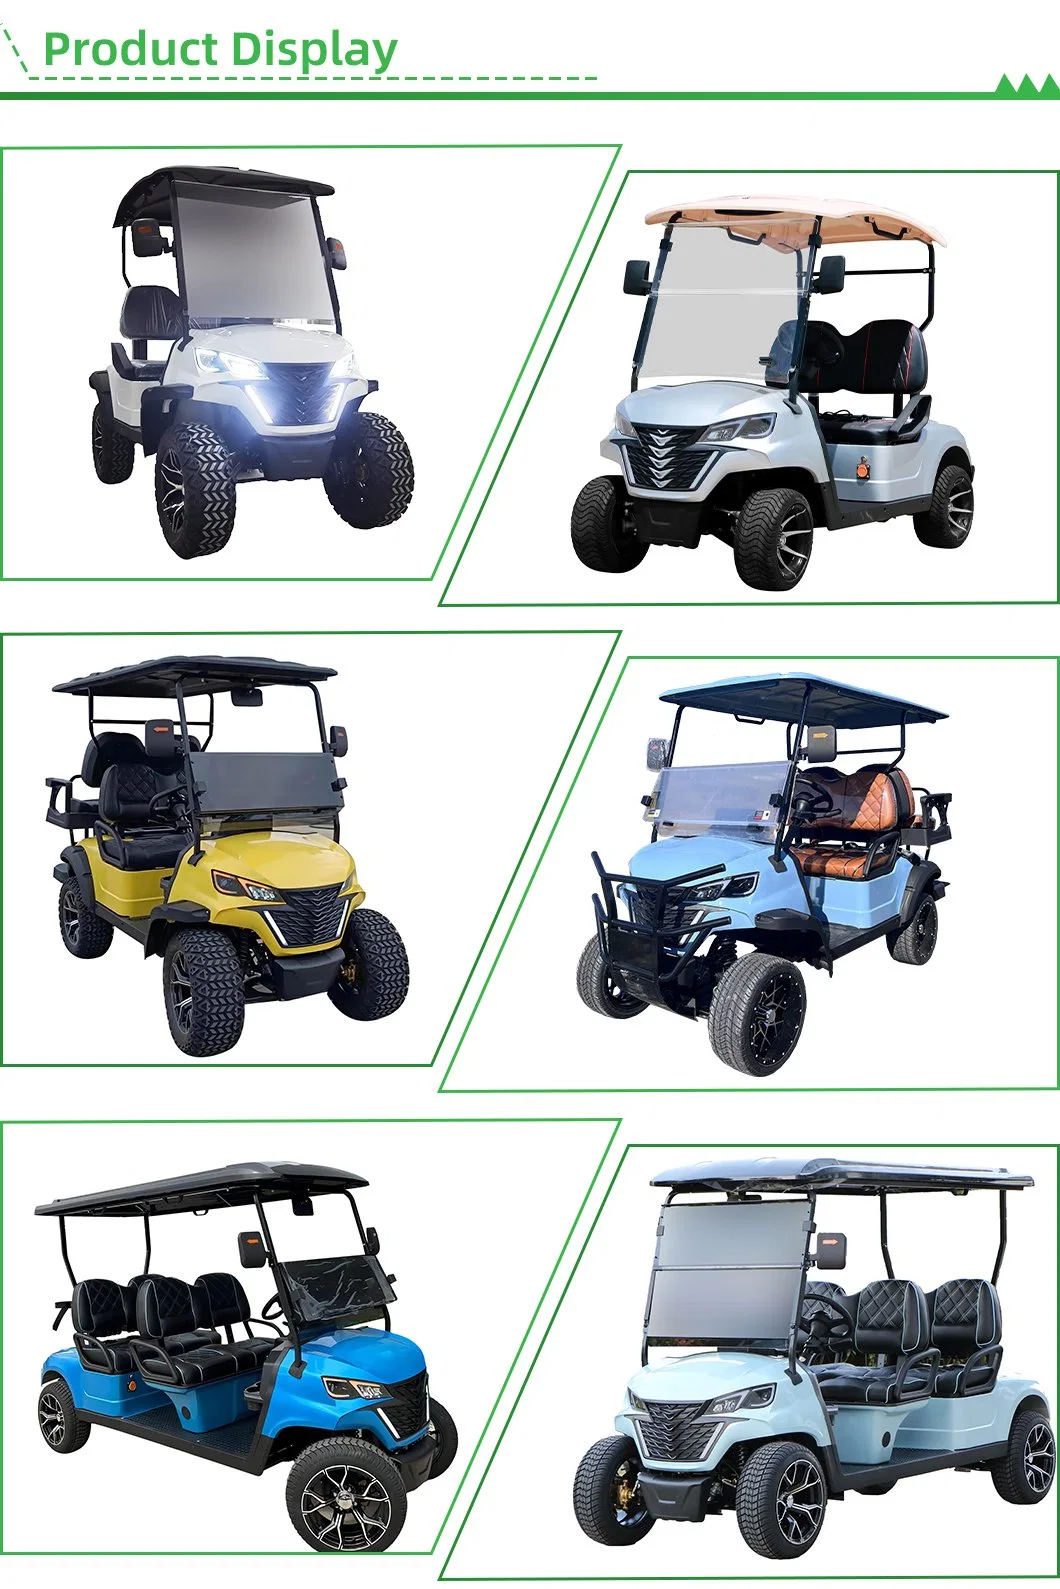 Airport Resort Shuttle Car Electric Hunt 6 Seats Lifted Sightseeing Golf Cart